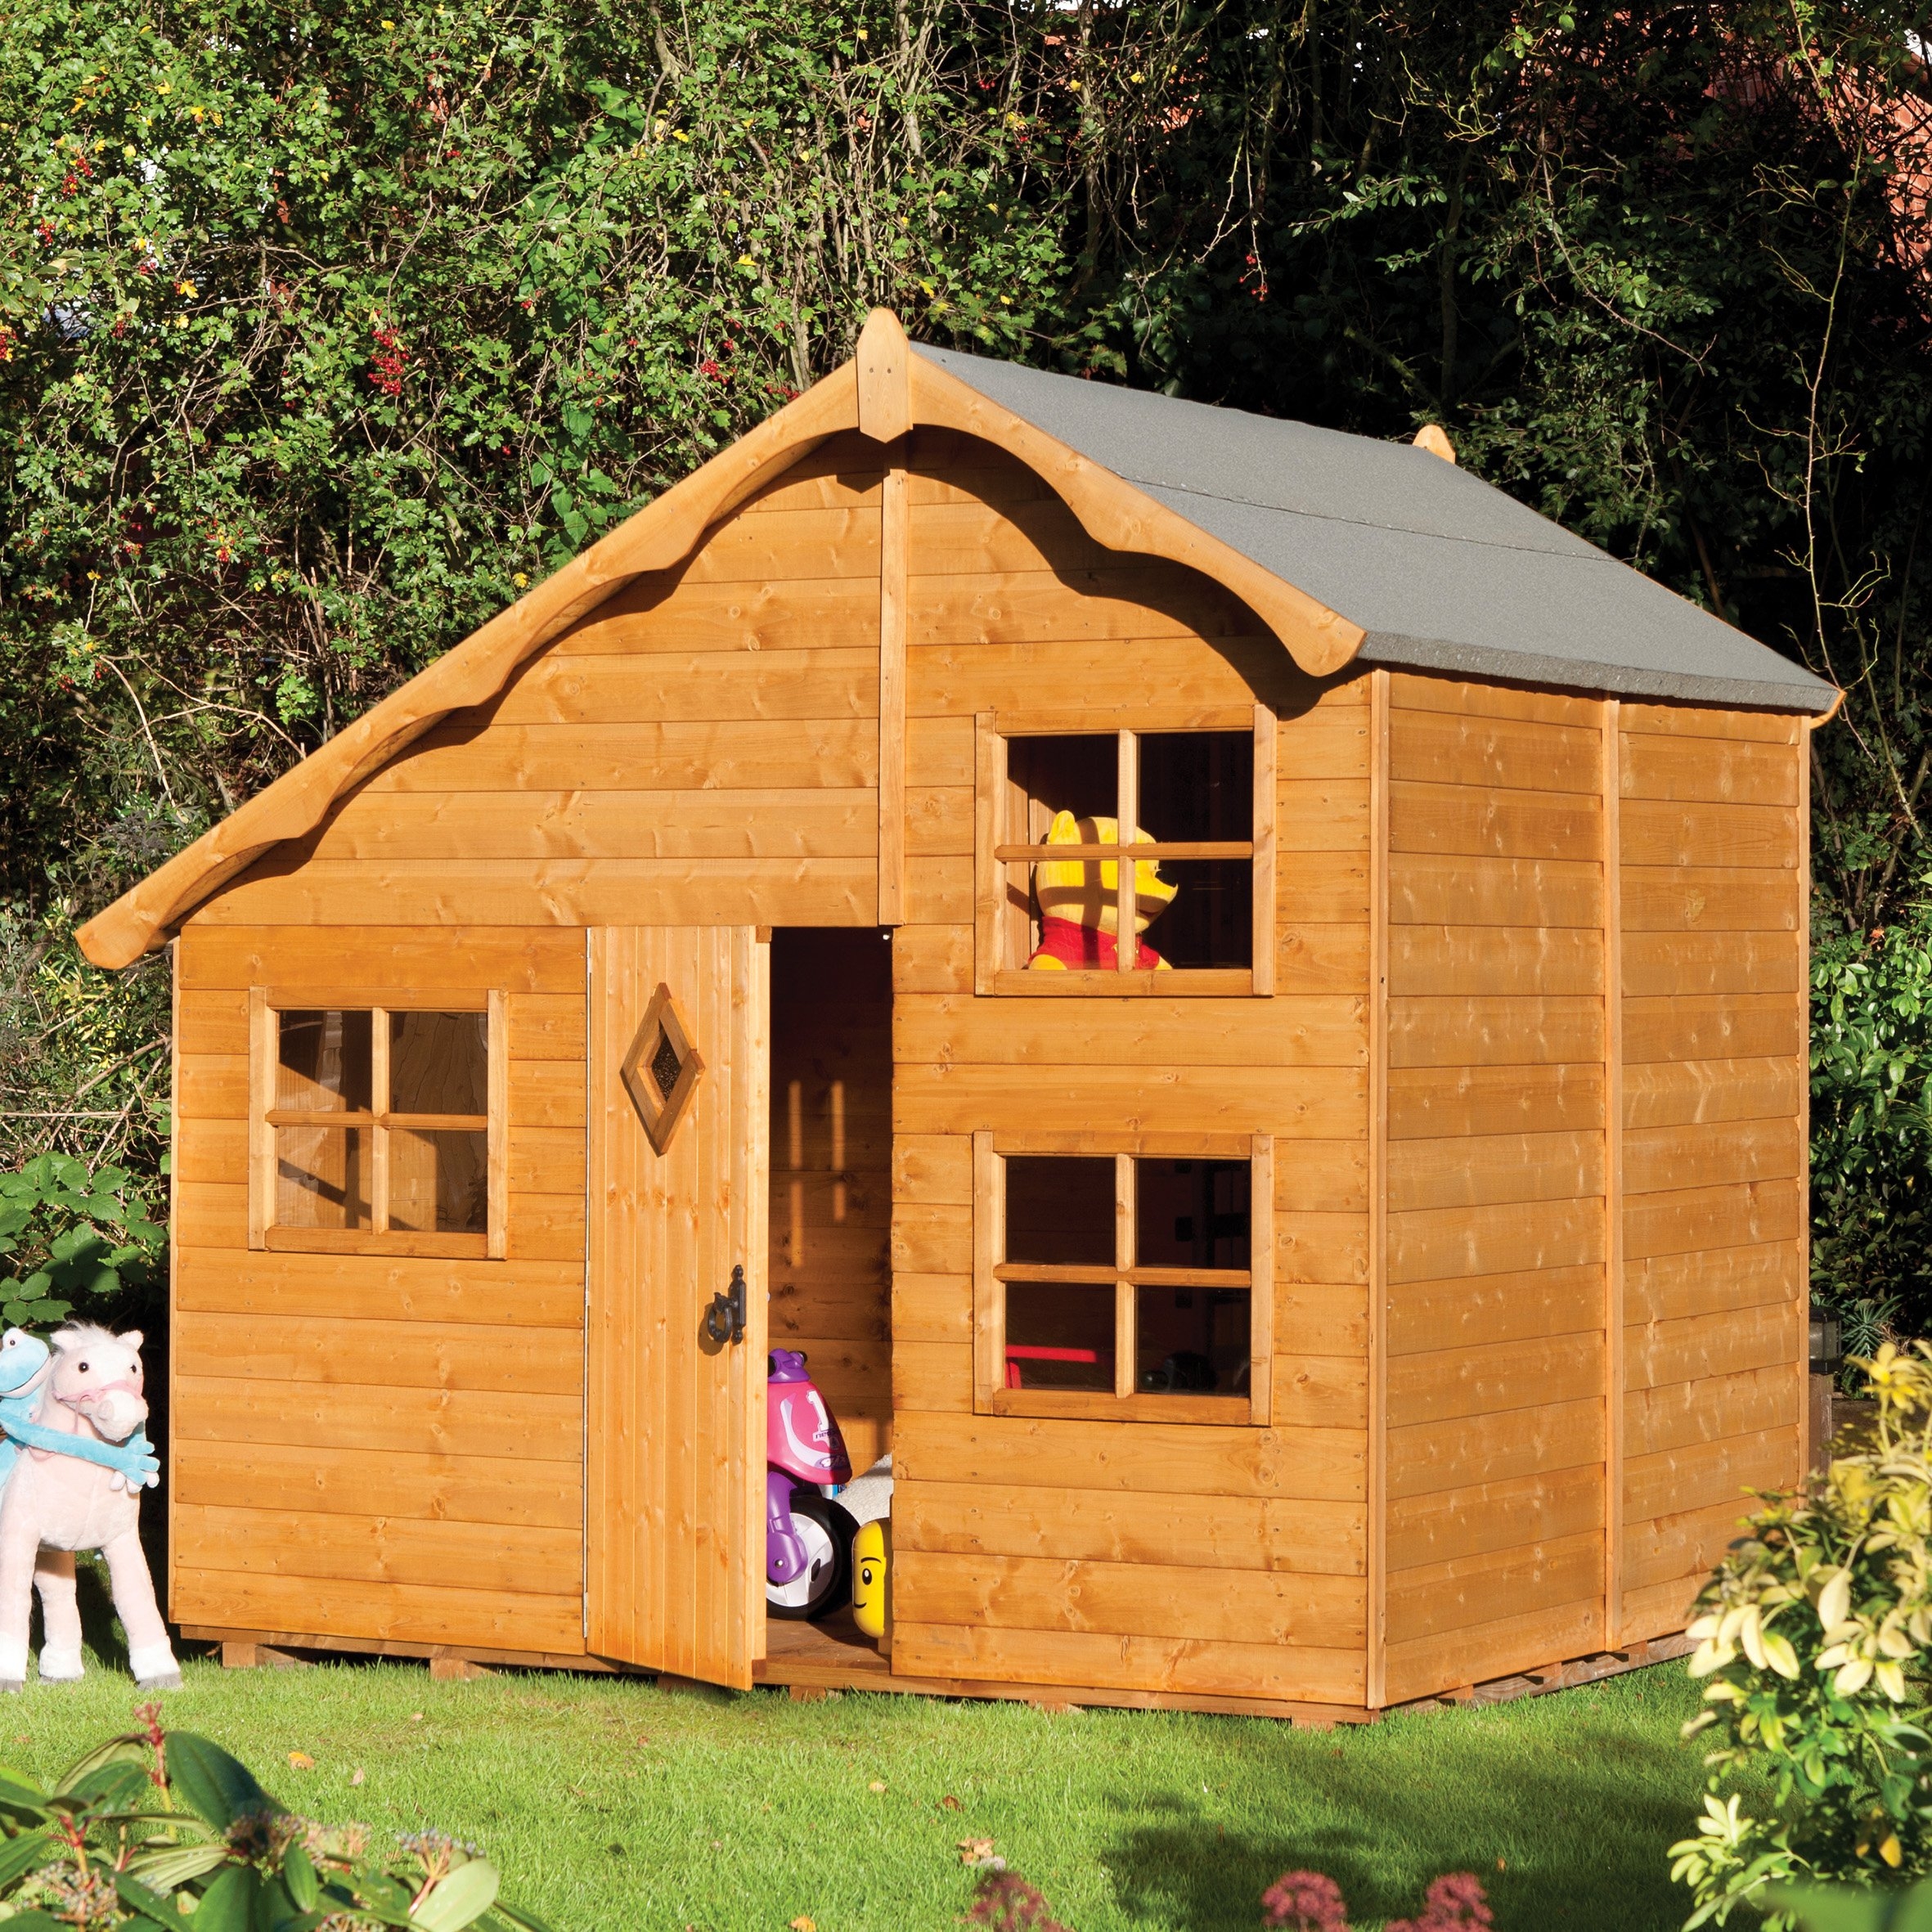 The Little Cottage Children’s Outdoor Playhouse